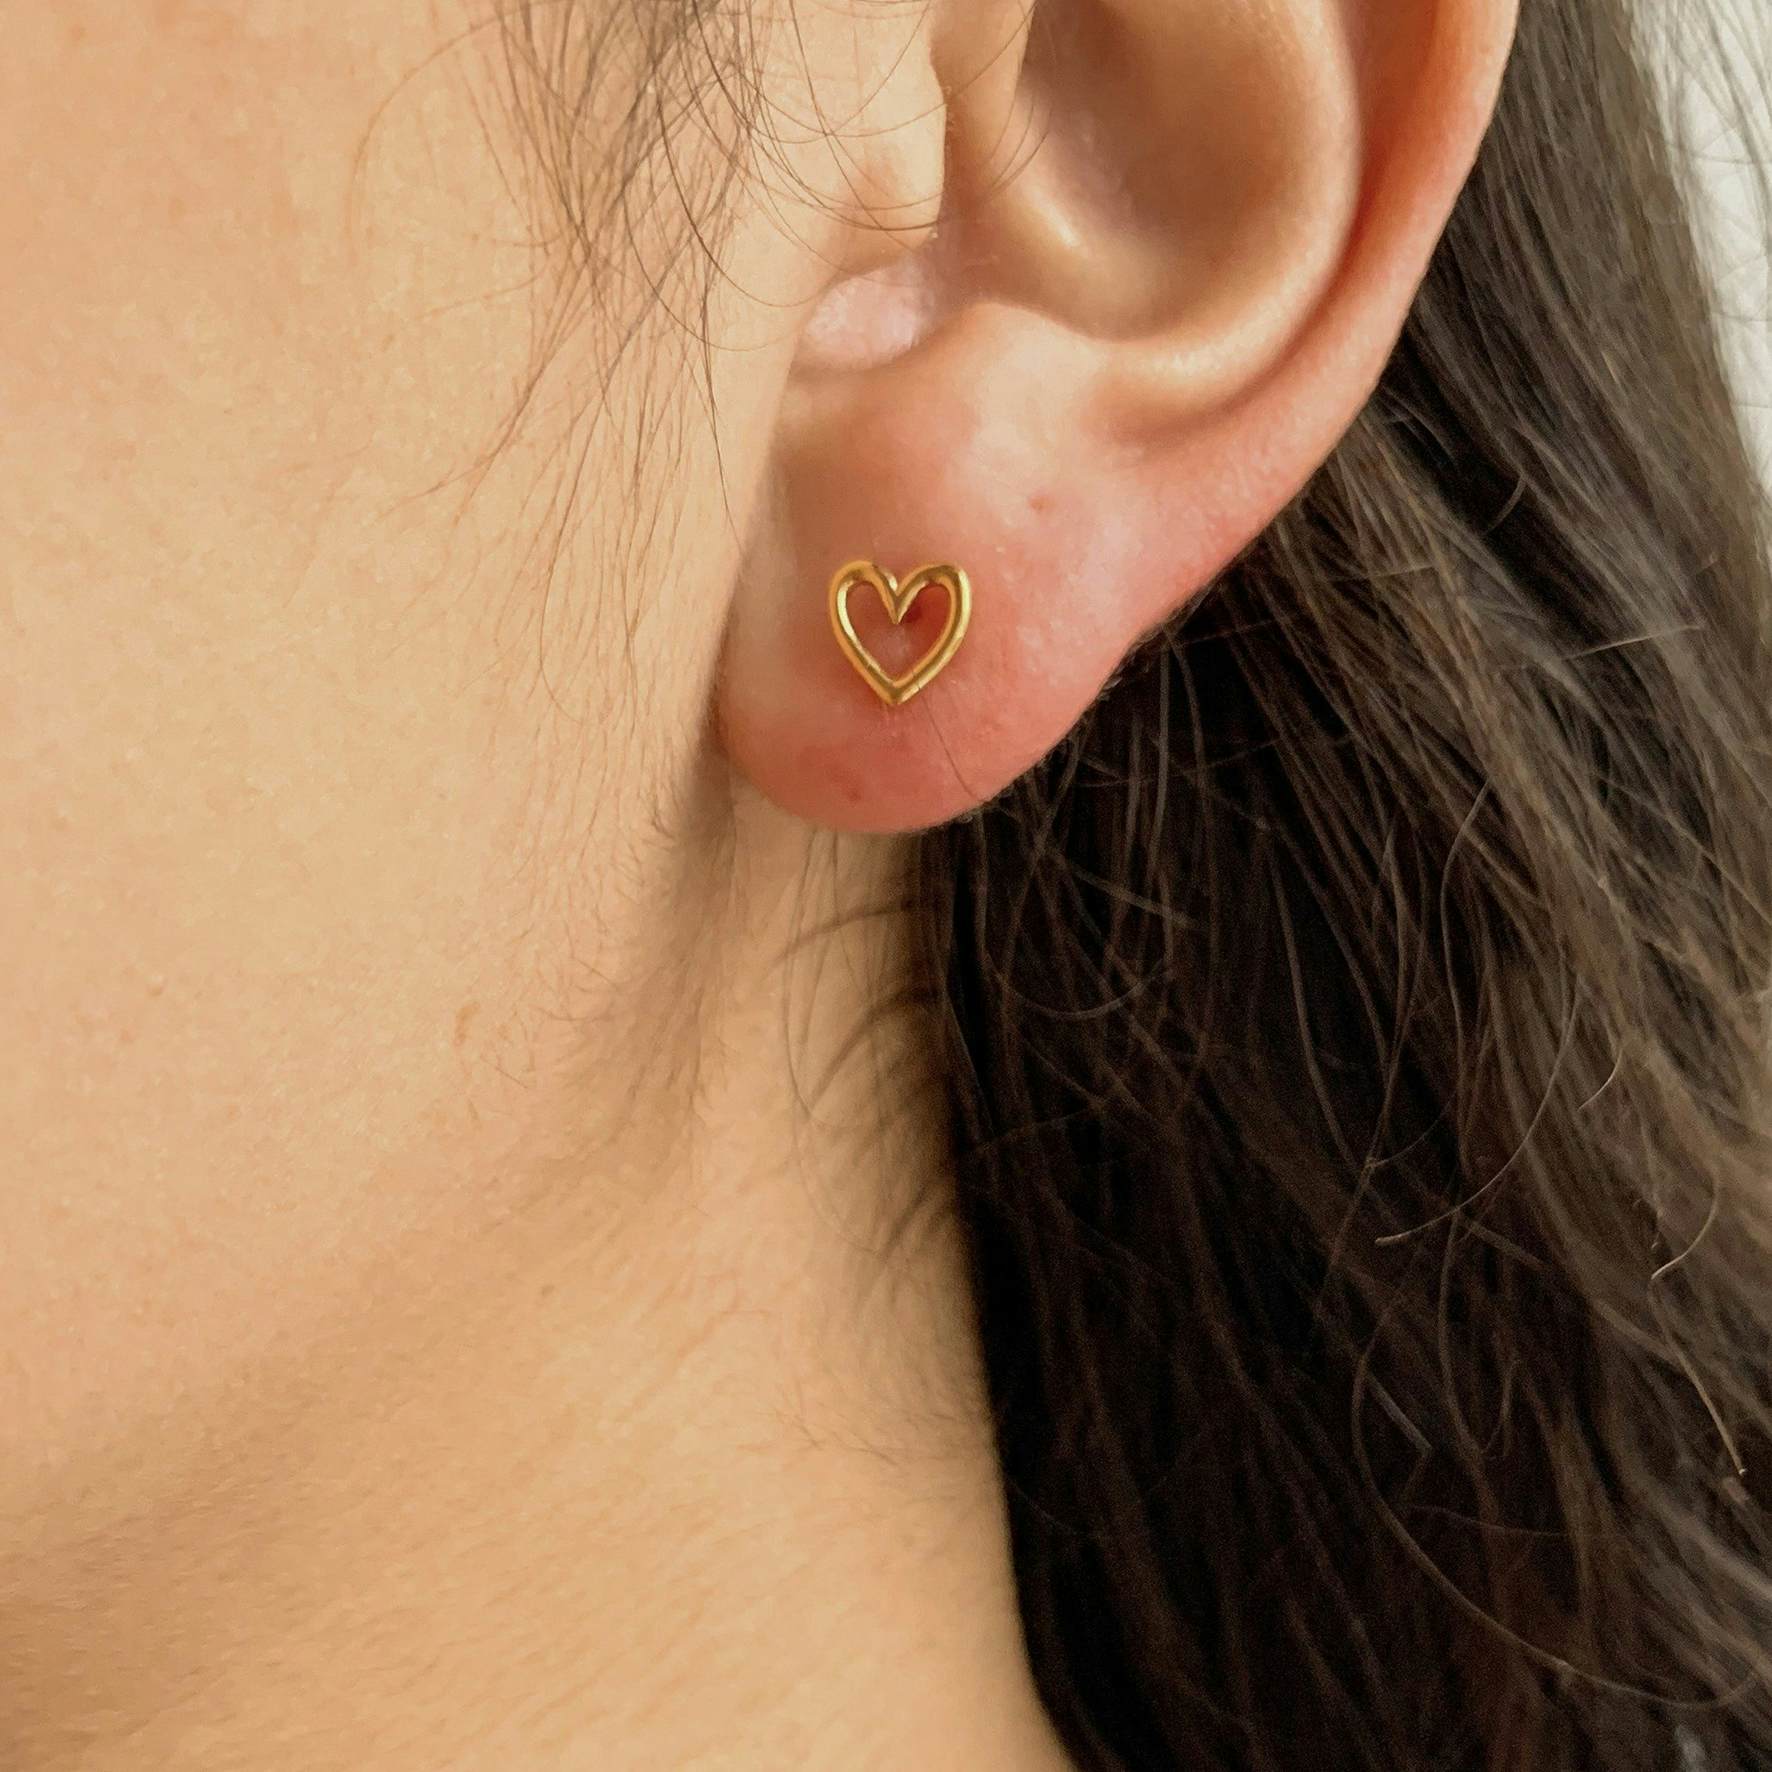 Love Charity Earsticks from Izabel Camille in Goldplated-Silver Sterling 925